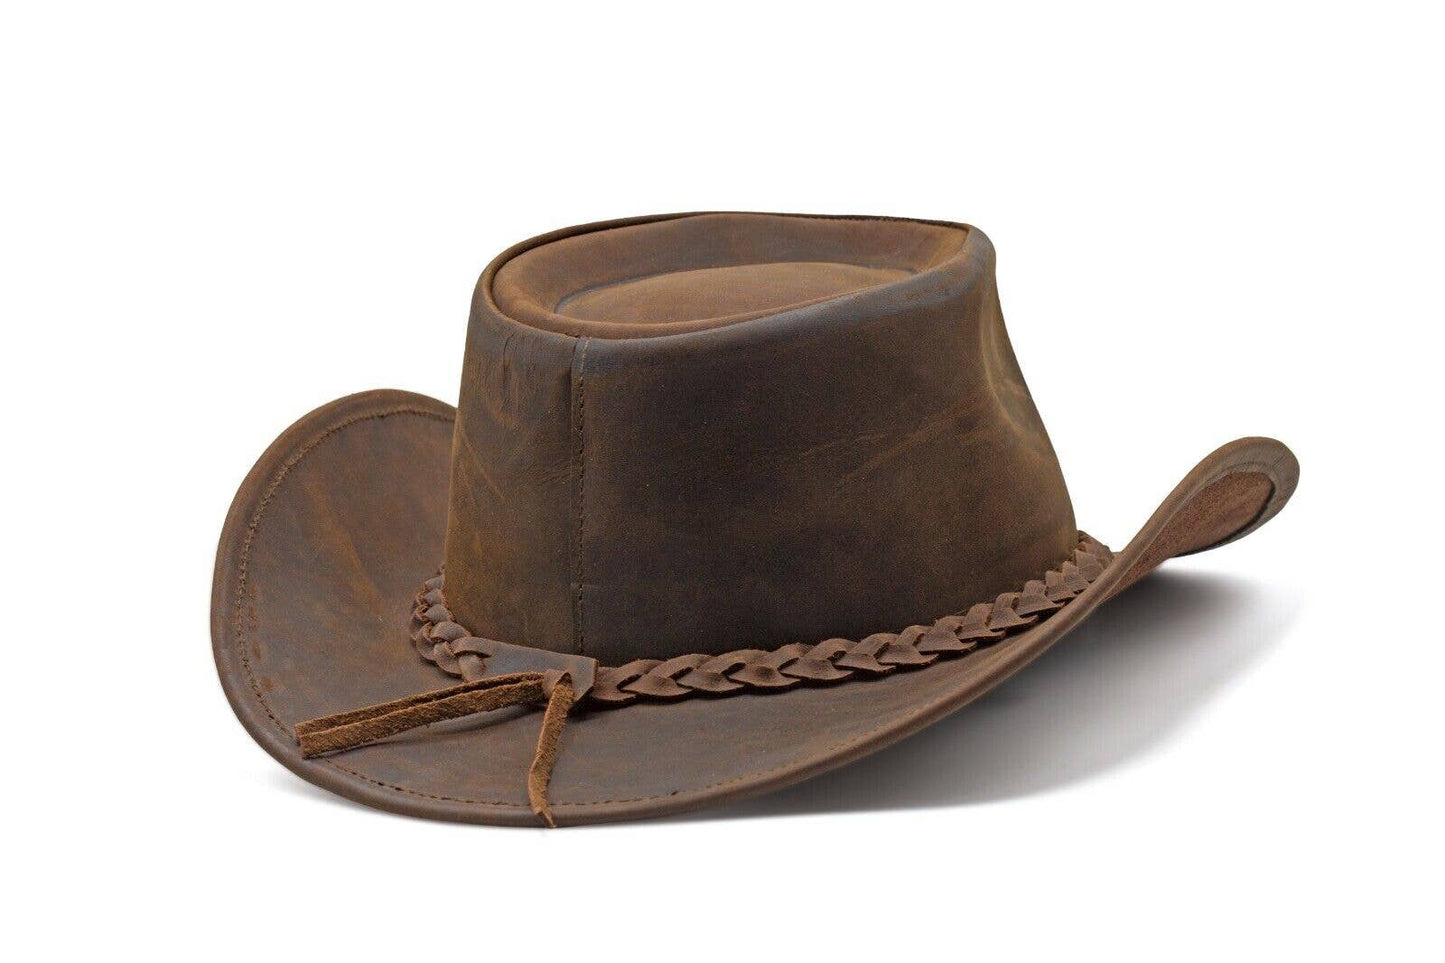 HADZAM Shapeable Western Durable Leather Outback Cowboy Hat